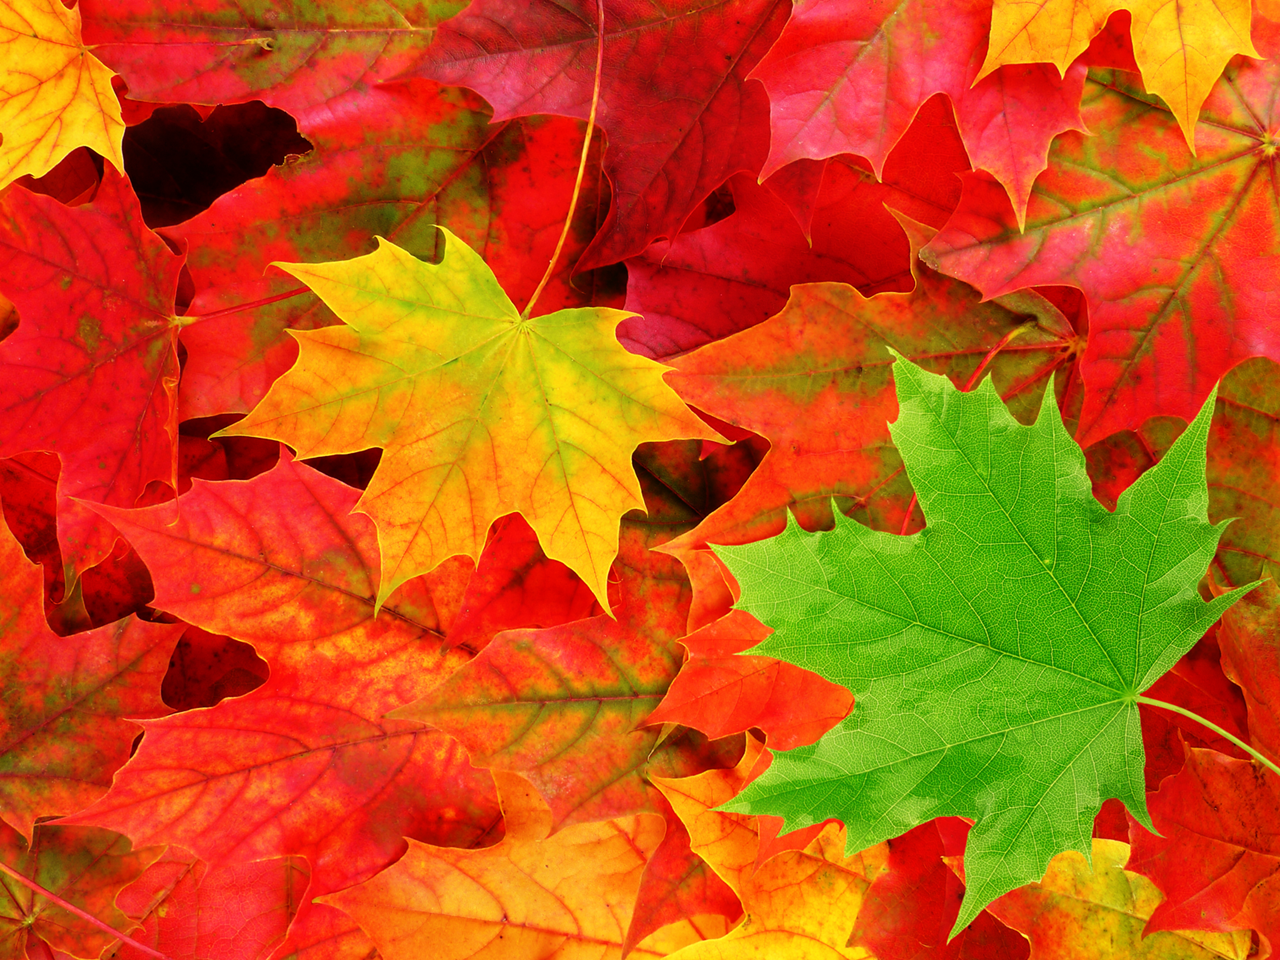 Fall Leaves Wallpaper Desktop Images amp Pictures   Becuo 1280x960